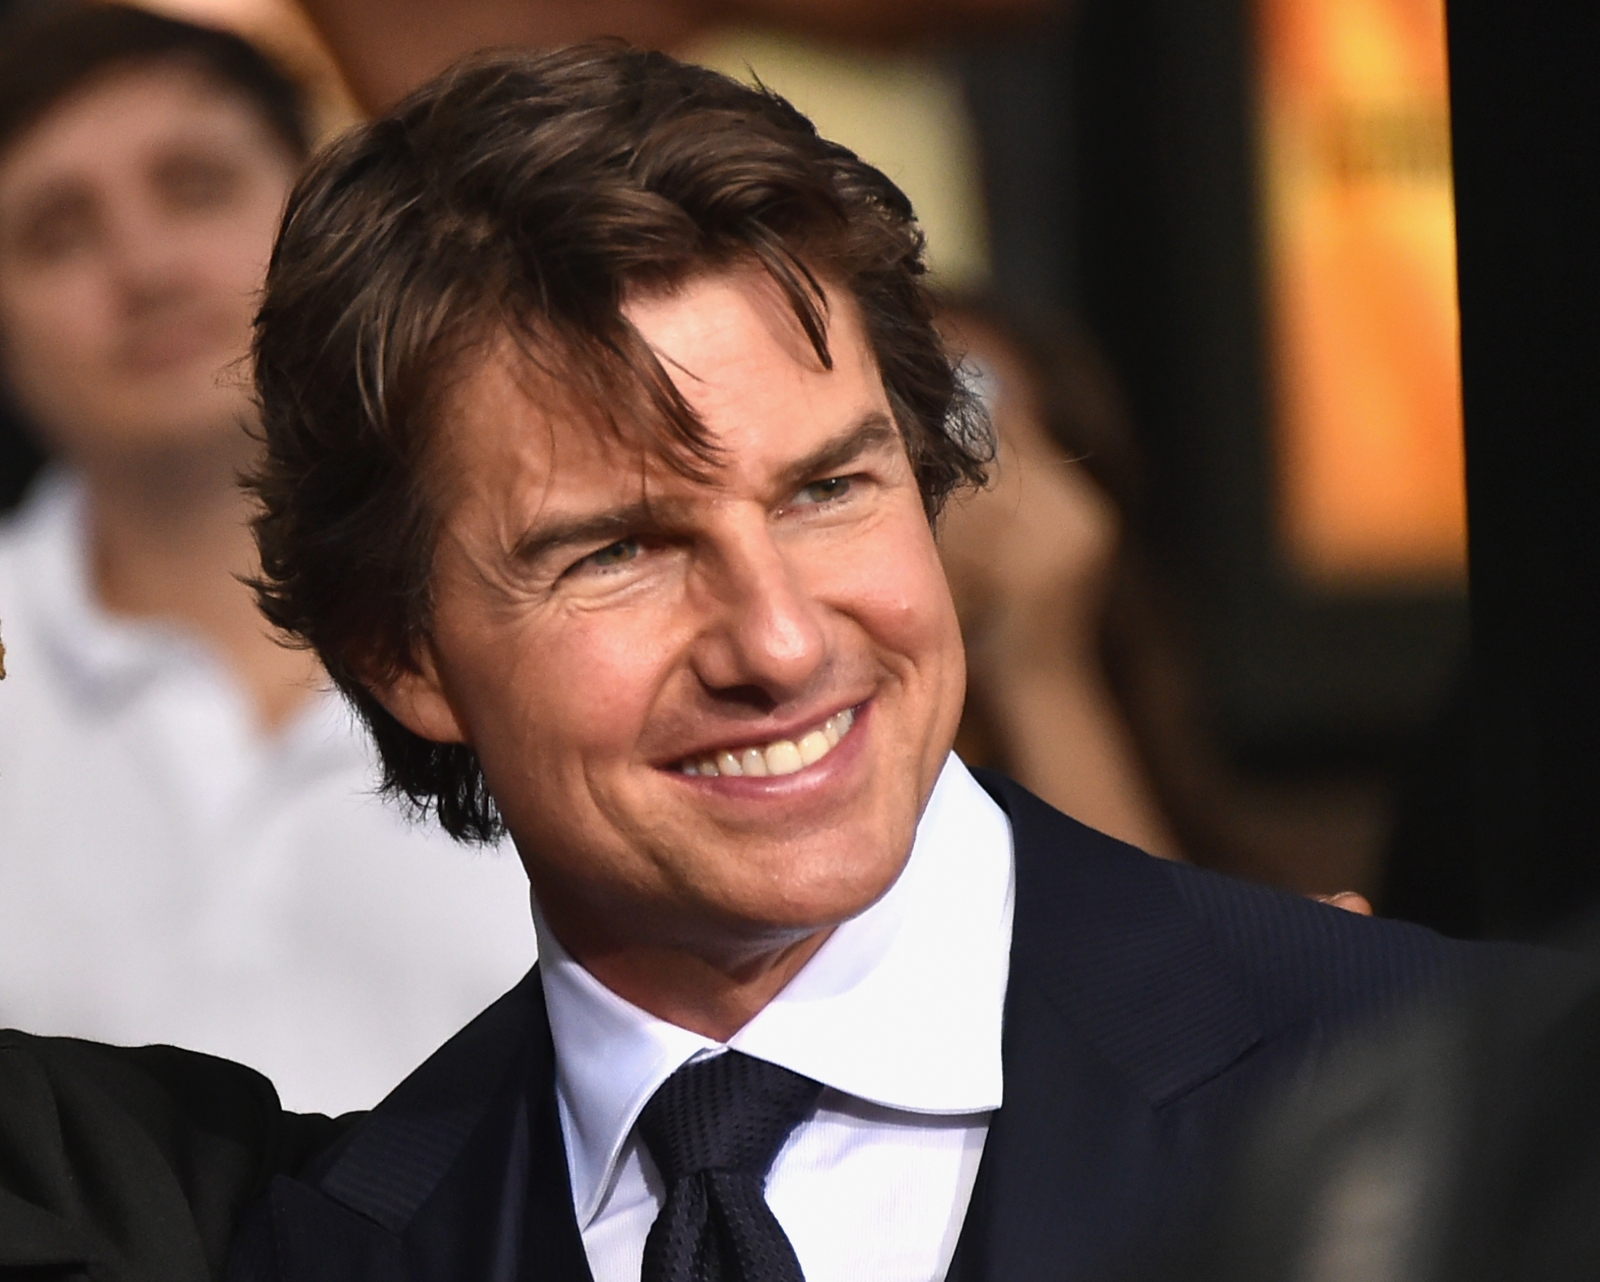 Tom Cruise flop The Mummy set to lose $95m at box office